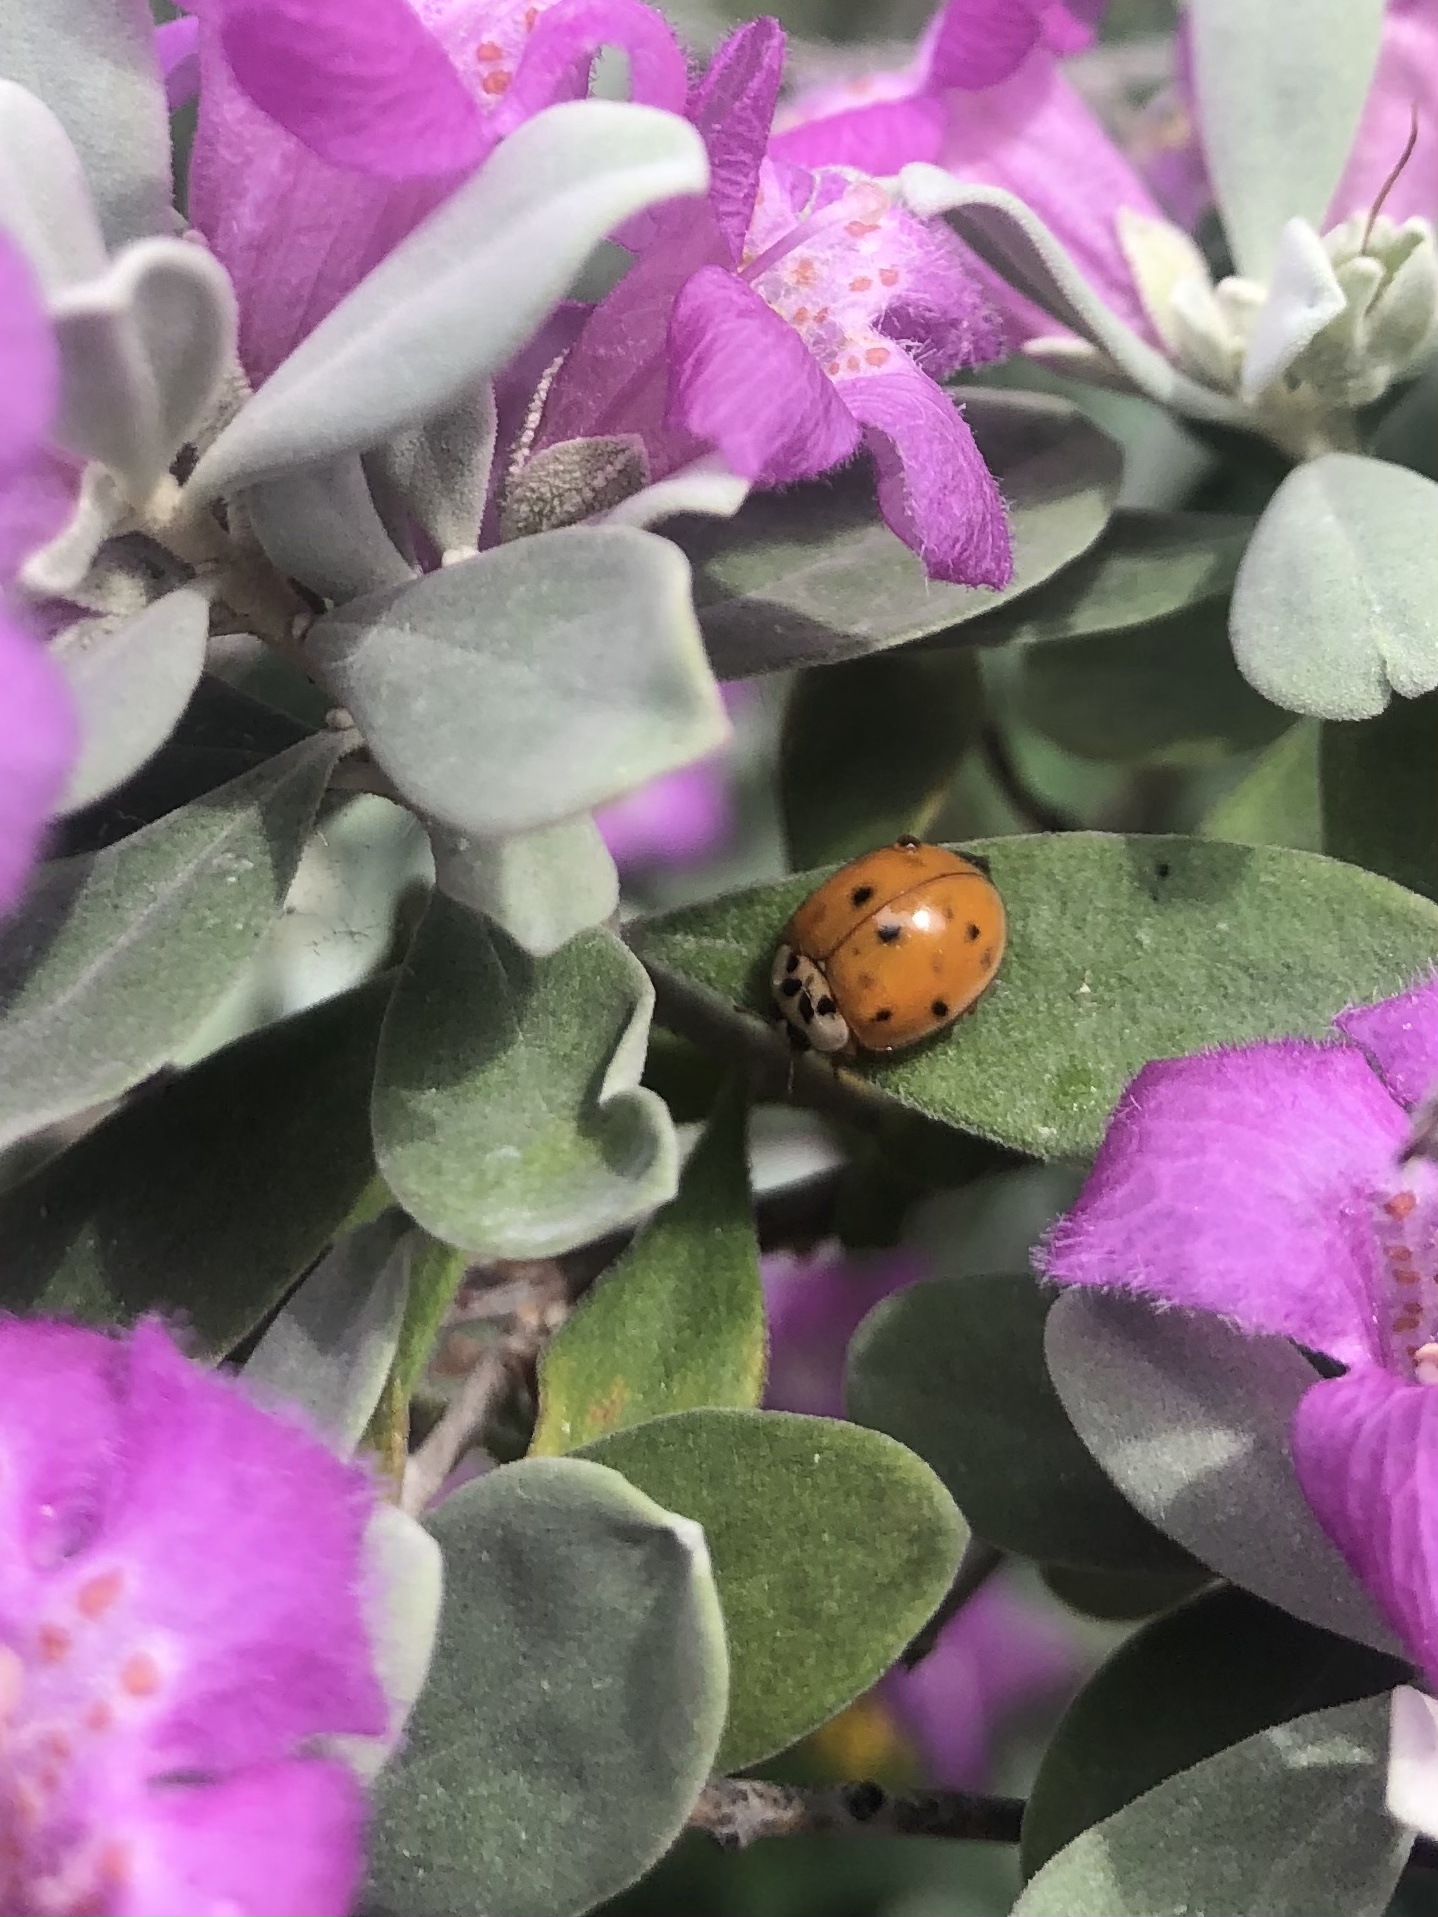 This Asian Beetle is NOT a Lady Bug